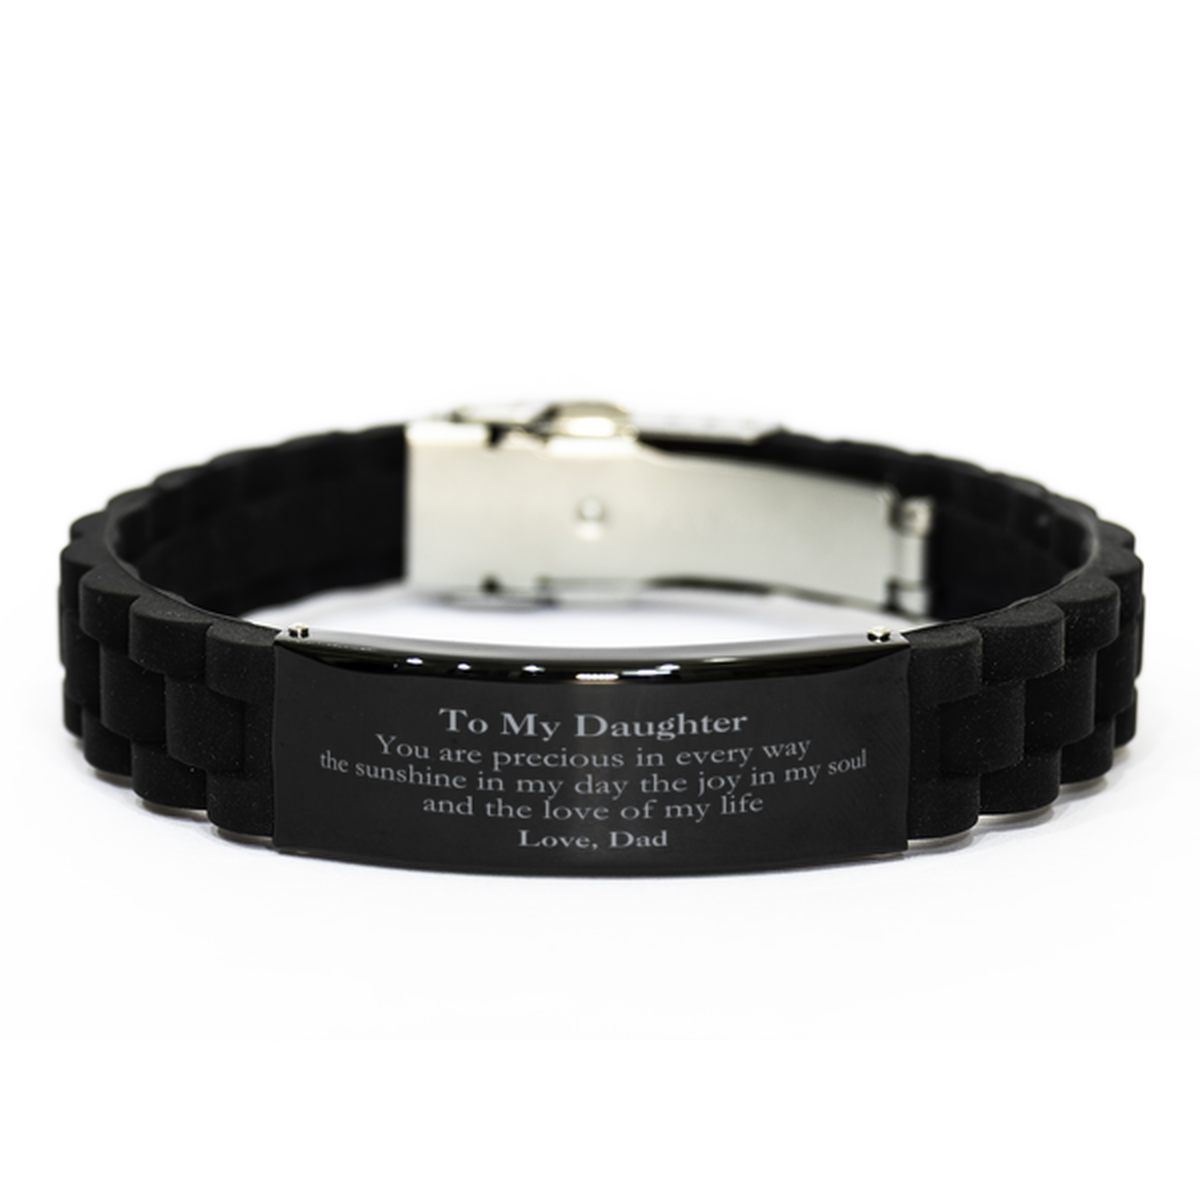 Graduation Gifts for Daughter Black Glidelock Clasp Bracelet Present from Dad, Christmas Daughter Birthday Gifts Daughter You are precious in every way the sunshine in my day. Love, Dad